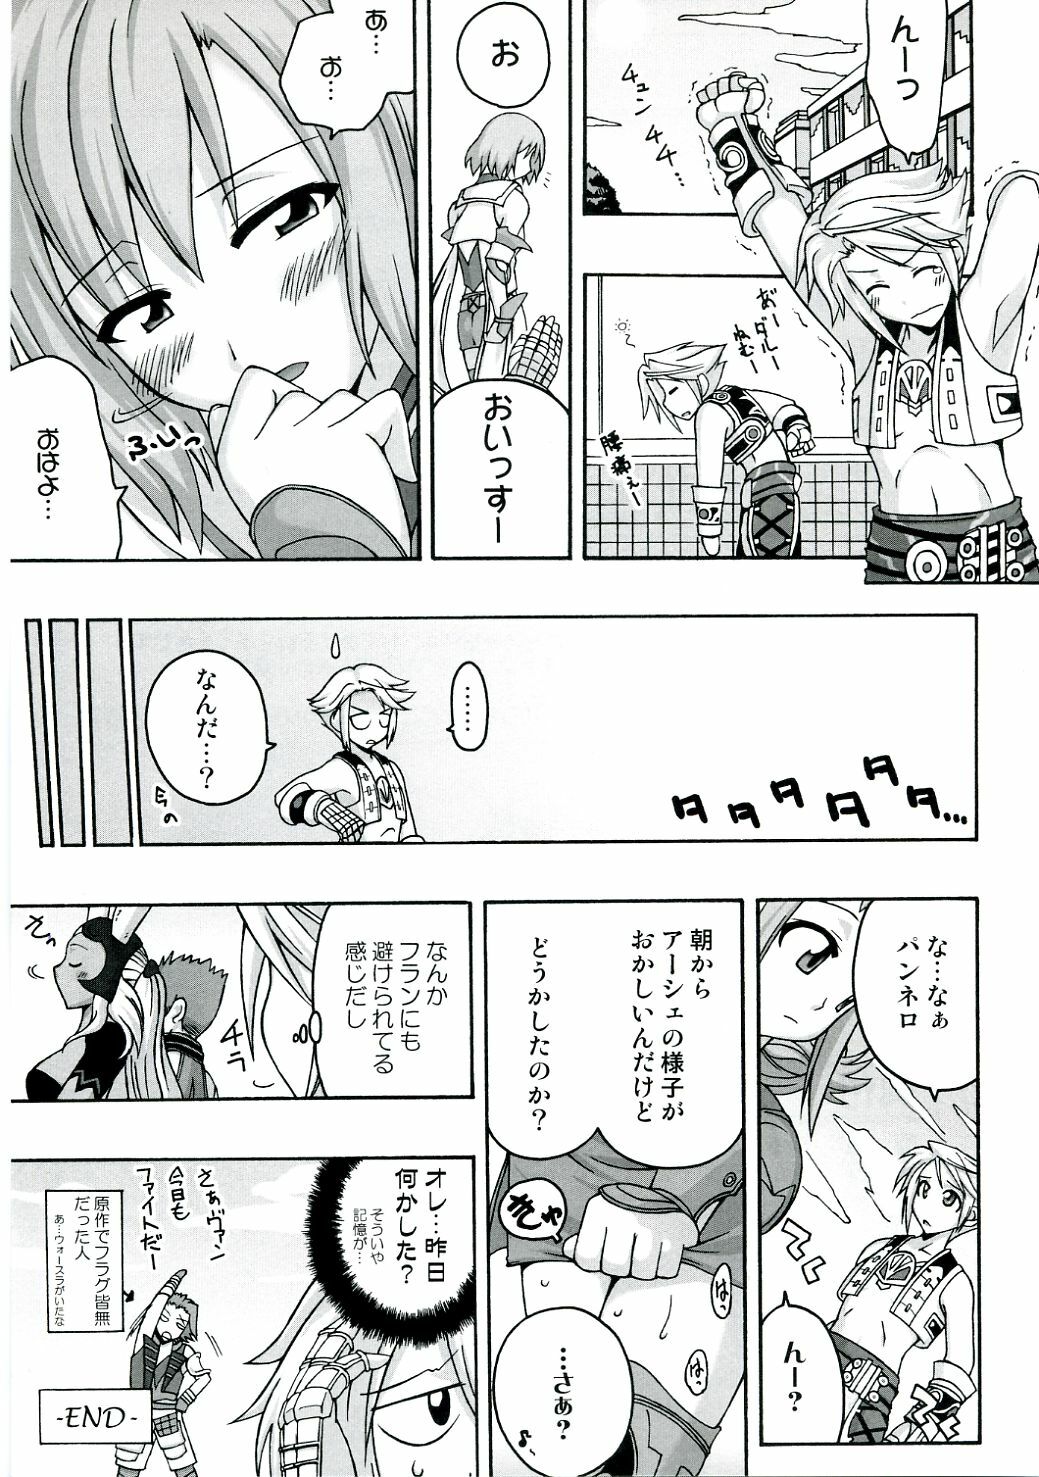 (C70) [FruitsJam (Mikagami Sou)] In The Room (Final Fantasy XII) page 24 full